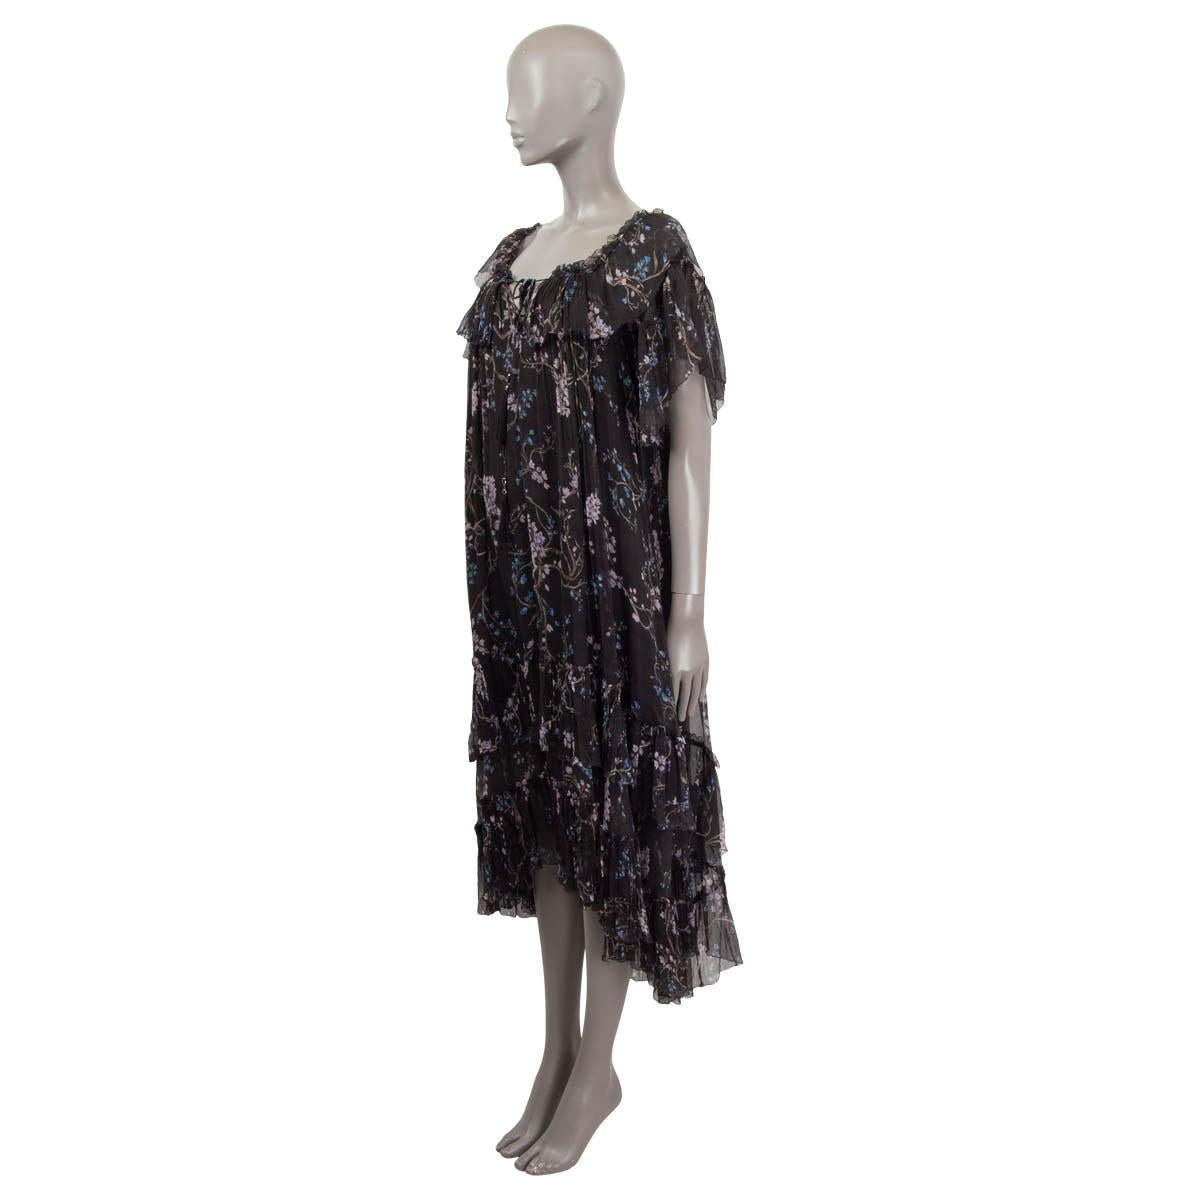 100% authentic Zimmermann Paradiso floating floral-print midi dress in black, lilac, brown and olive green silk (100% please note the content tag is missing). Features sheer ruffled short sleeves and a ruffled drawstring neckline. Lined in black